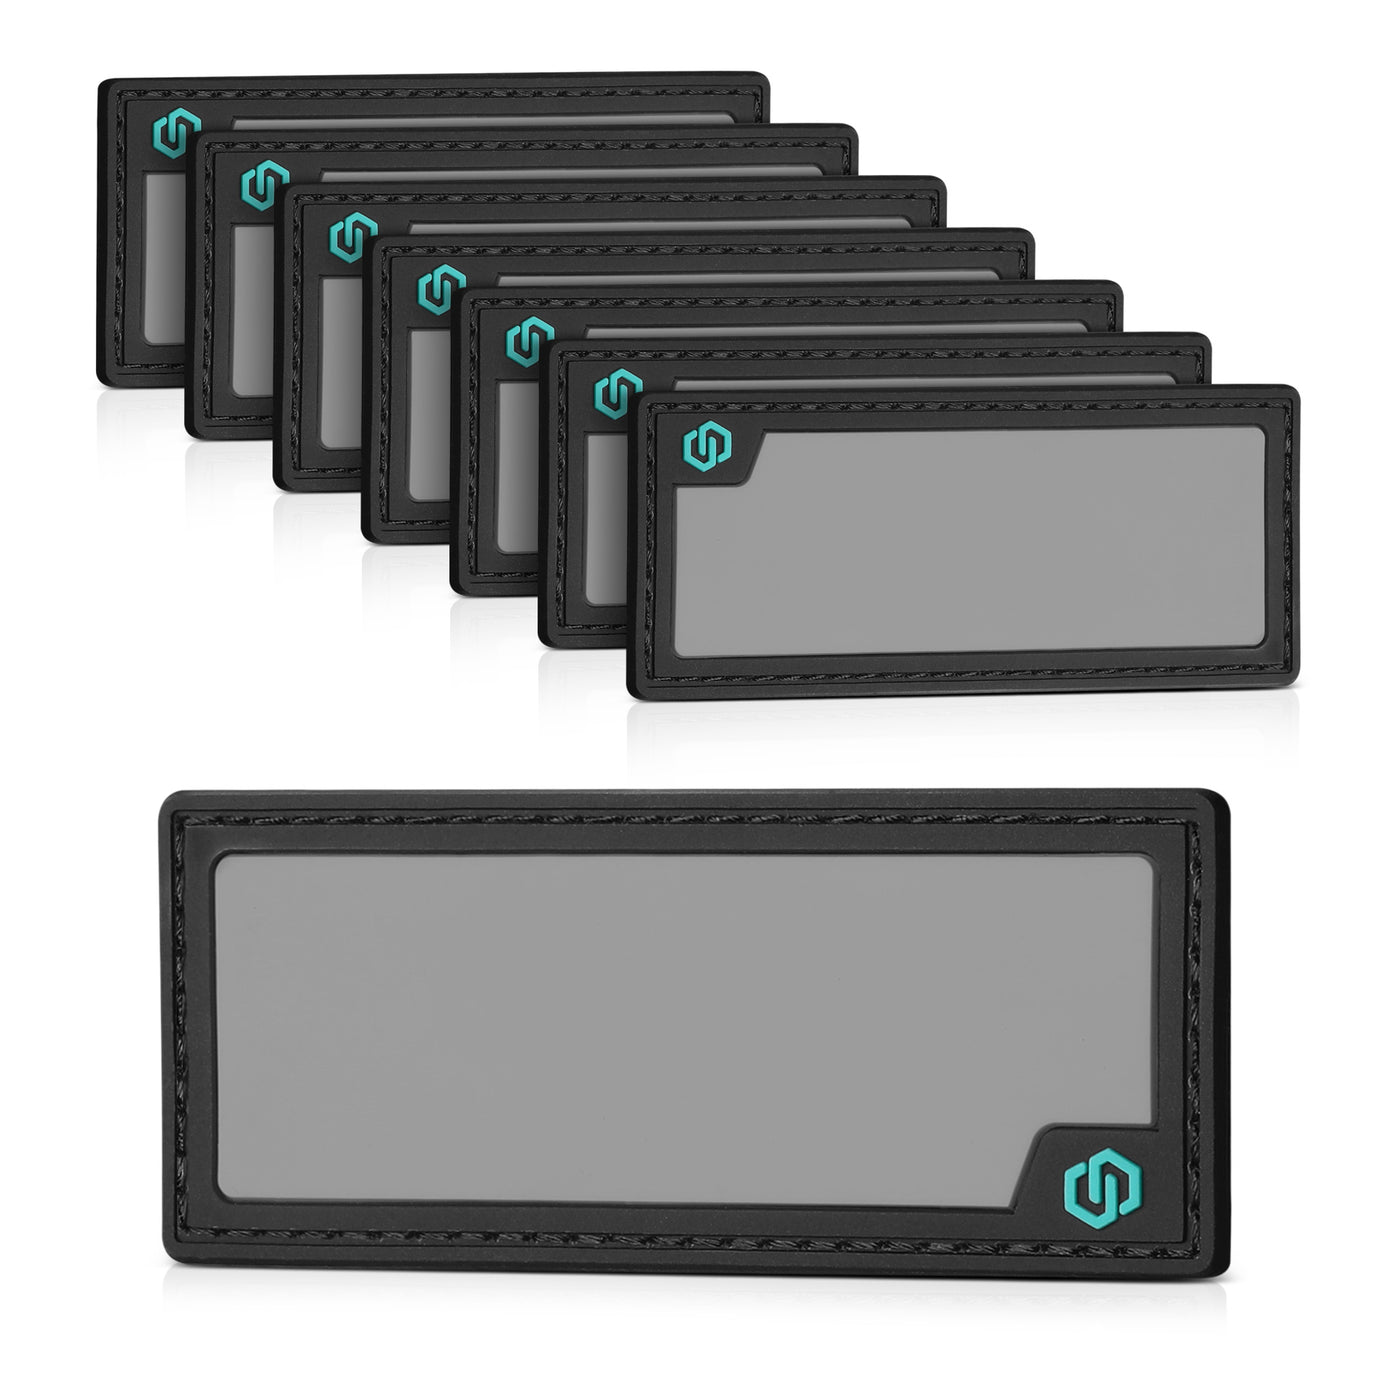 Writable ID Patches - 8 Pack